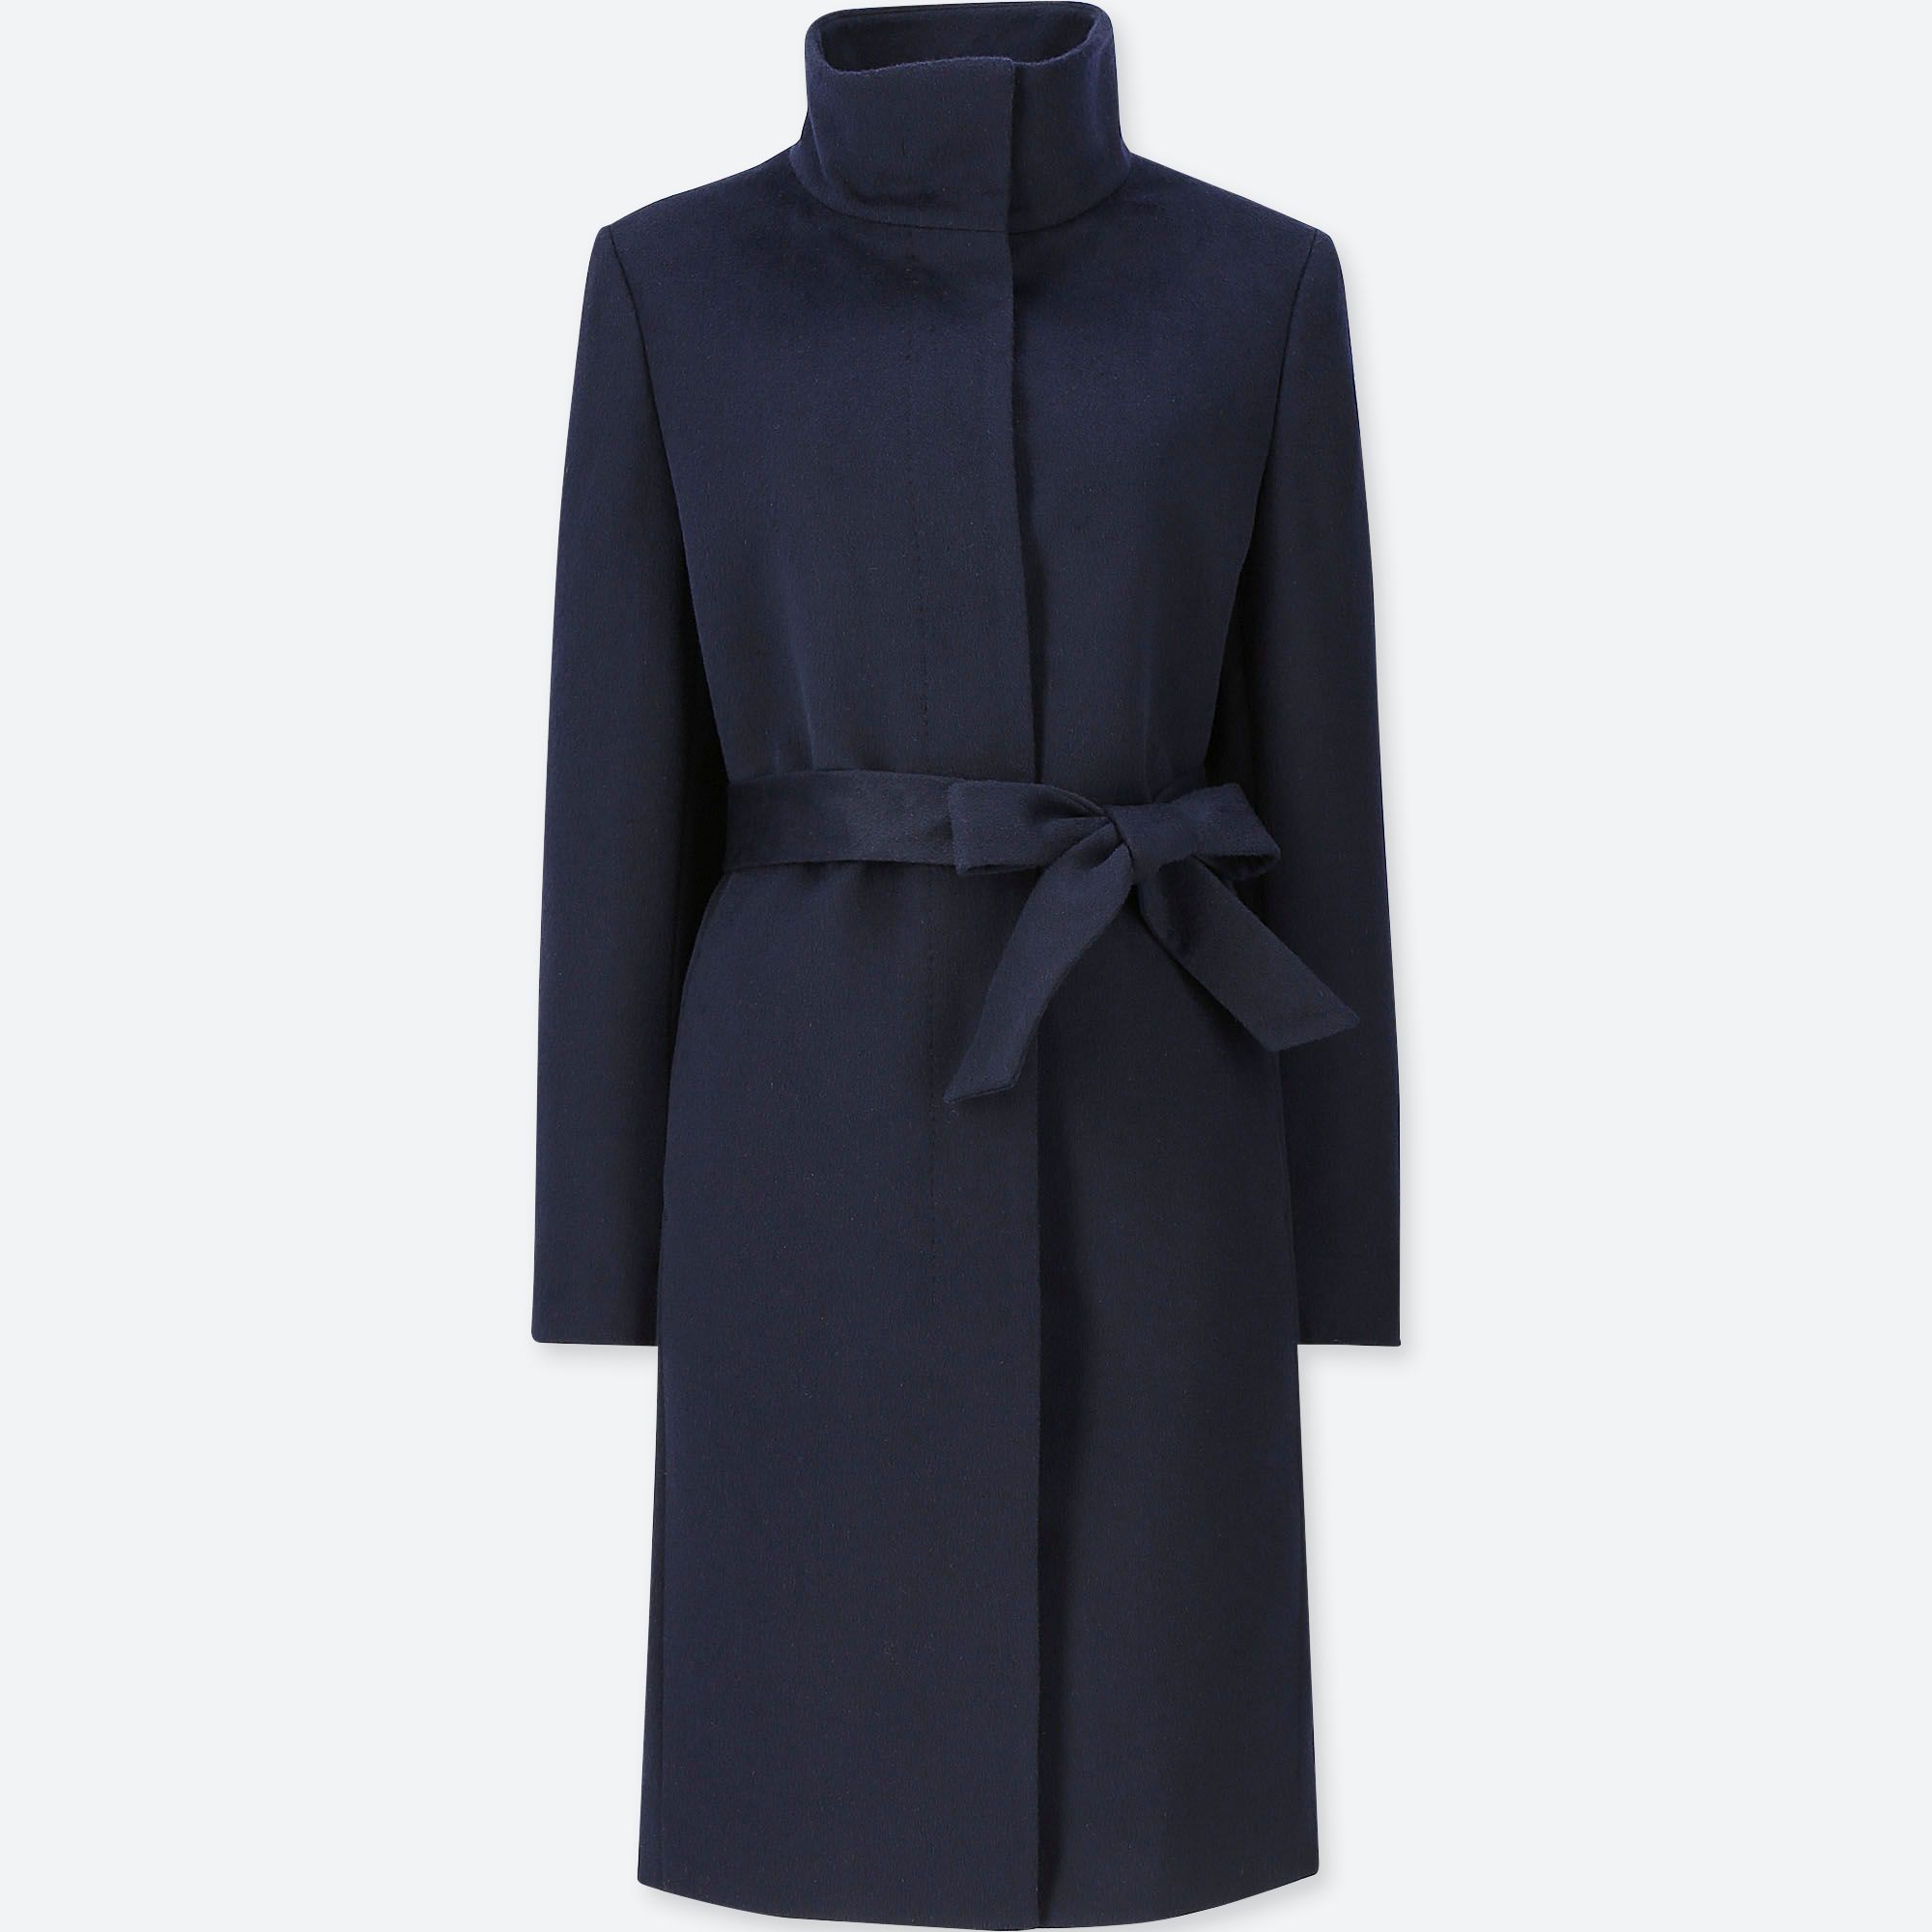 WOMEN CASHMERE BLENDED STAND COLLAR COAT | UNIQLO (US)